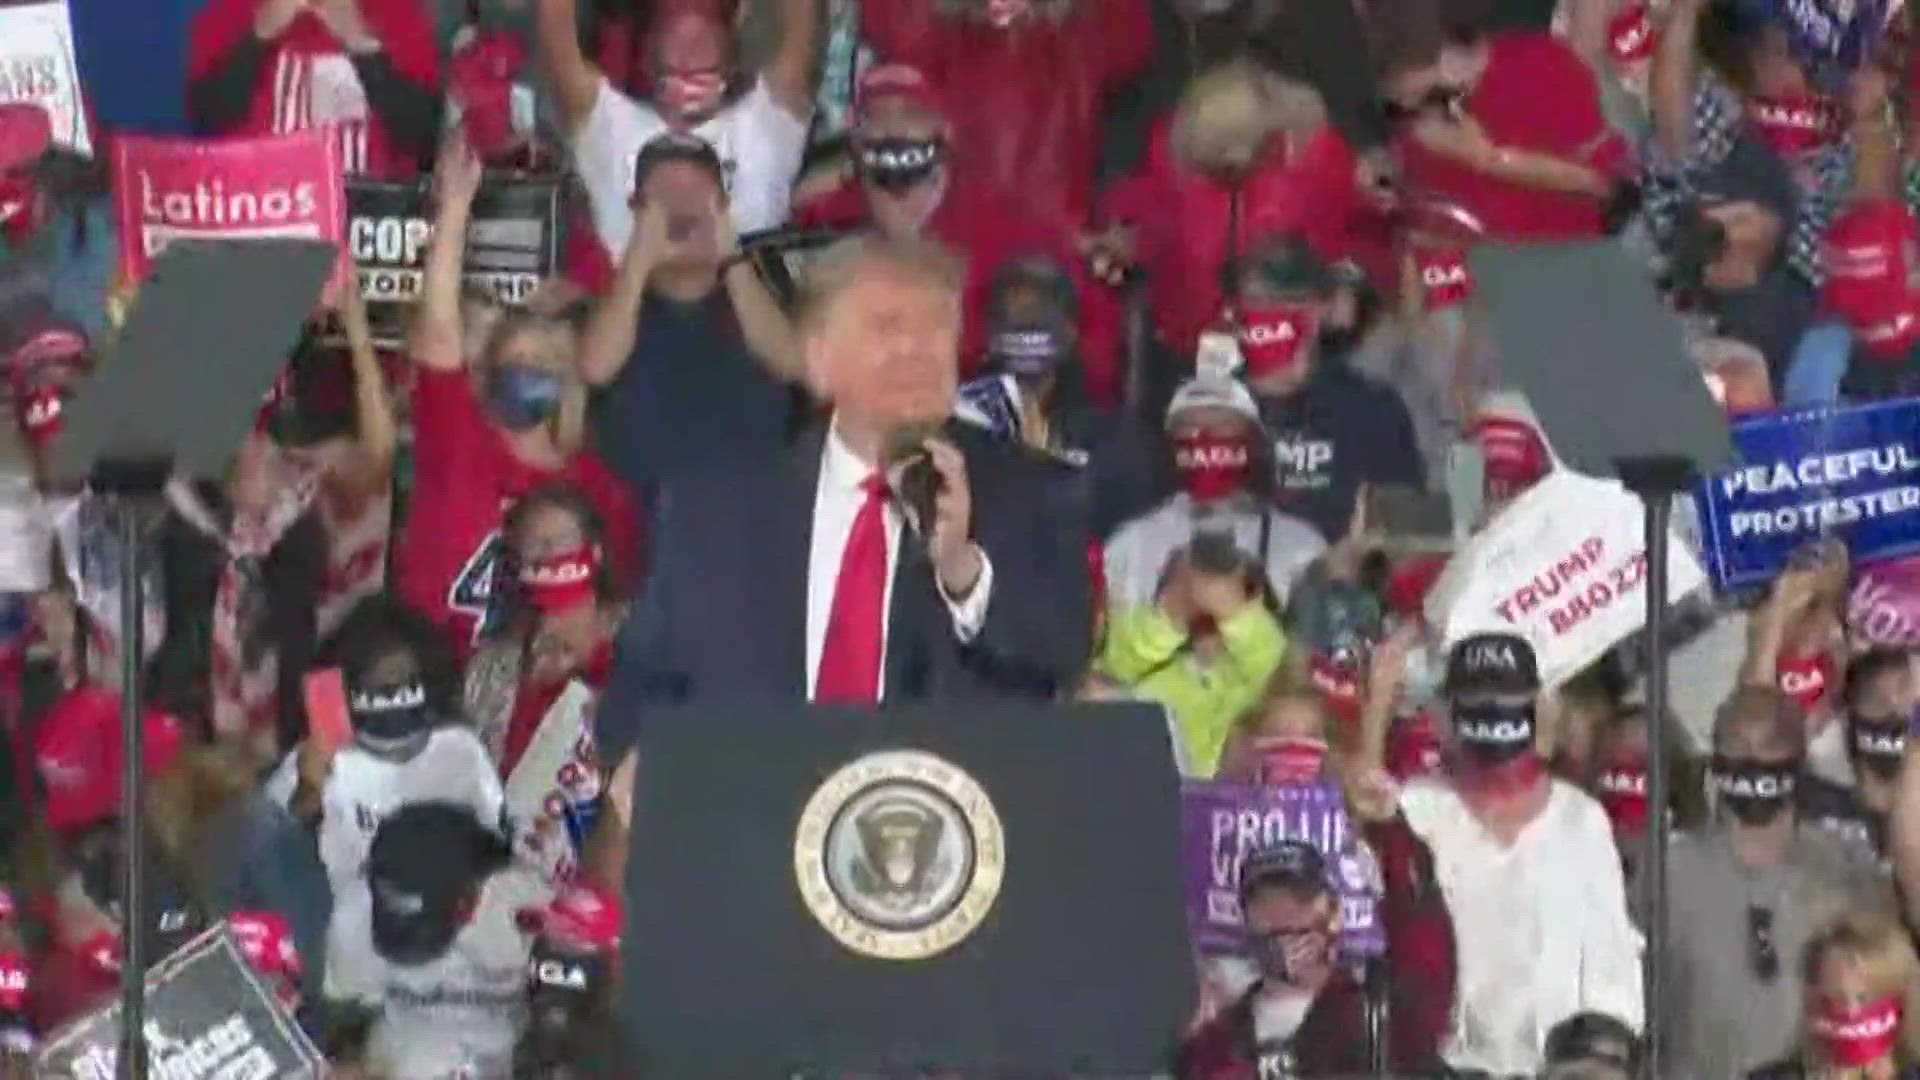 President Donald J. Trump spoke Friday night at a Make America Great Again rally at the Middle Georgia Regional Airport in Macon, Georgia.